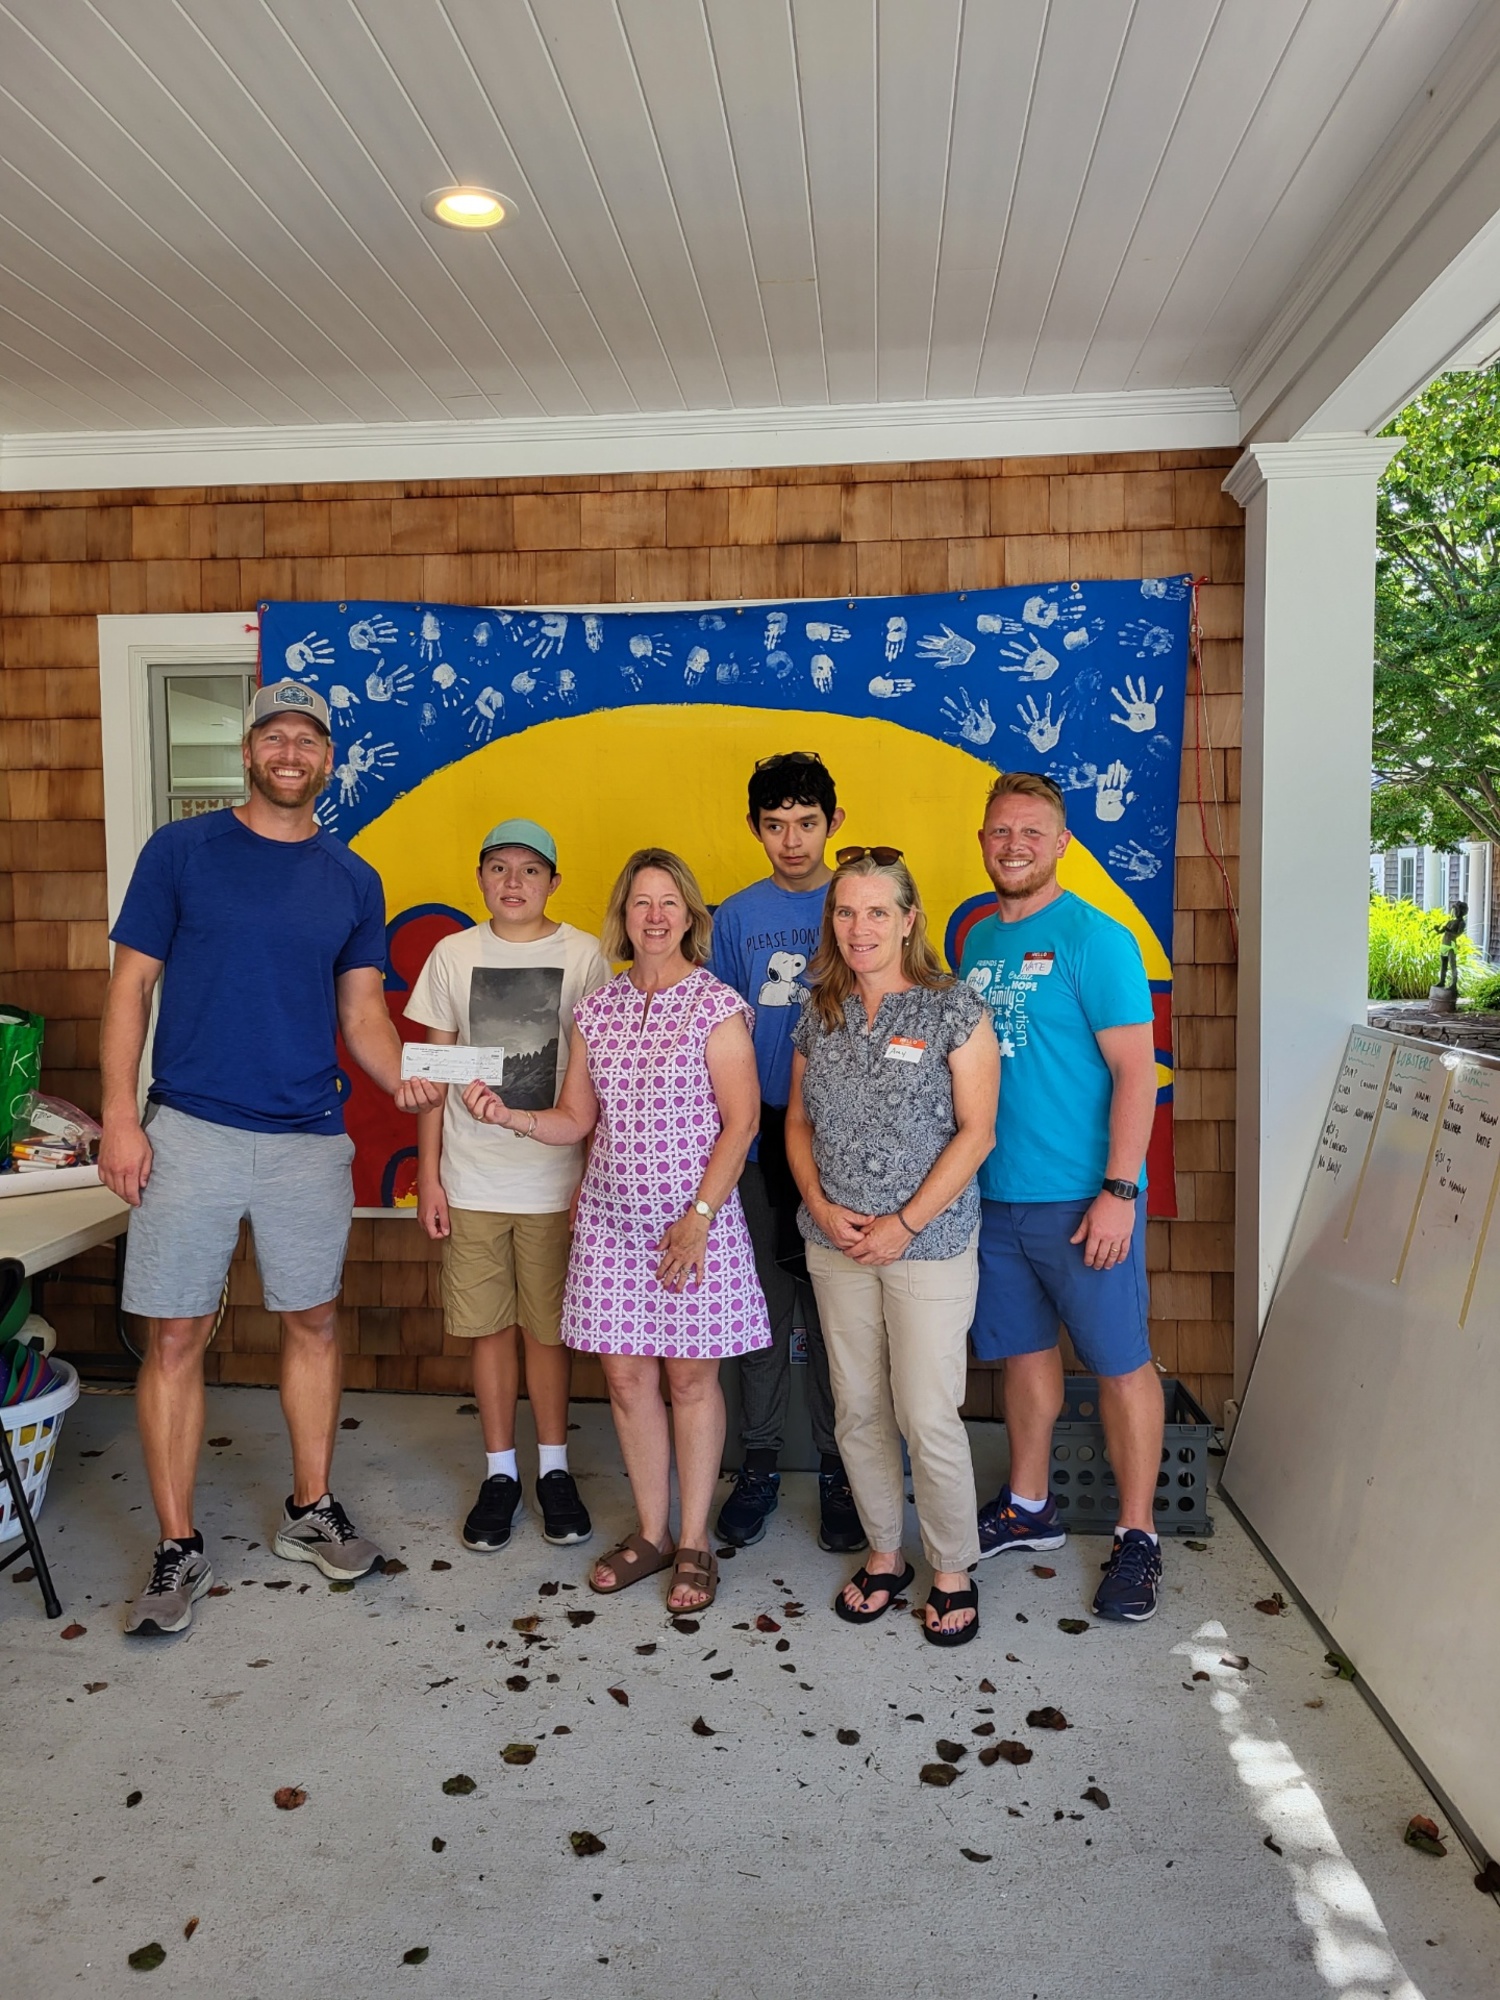 Kiwanis Club of Southampton Town presented a check to the Flying Point Foundation for Autism during its recent camp session at the Southampton Fresh Air Home. The donation represents a portion of the proceeds of the June golf outing organized by Kiwanis. From left, Flying Point Foundation for Autism board member Nick Epley, a camper, Kiwanis President Lorri Schneider, a camper, Kiwanis member Amy Graham, and Camp Flying Point Director Nate Unwin. While at the camp, Kiwanis Club treated campers to ice cream. COURTESY SOUTHAMPTON TOWN KIWANIS